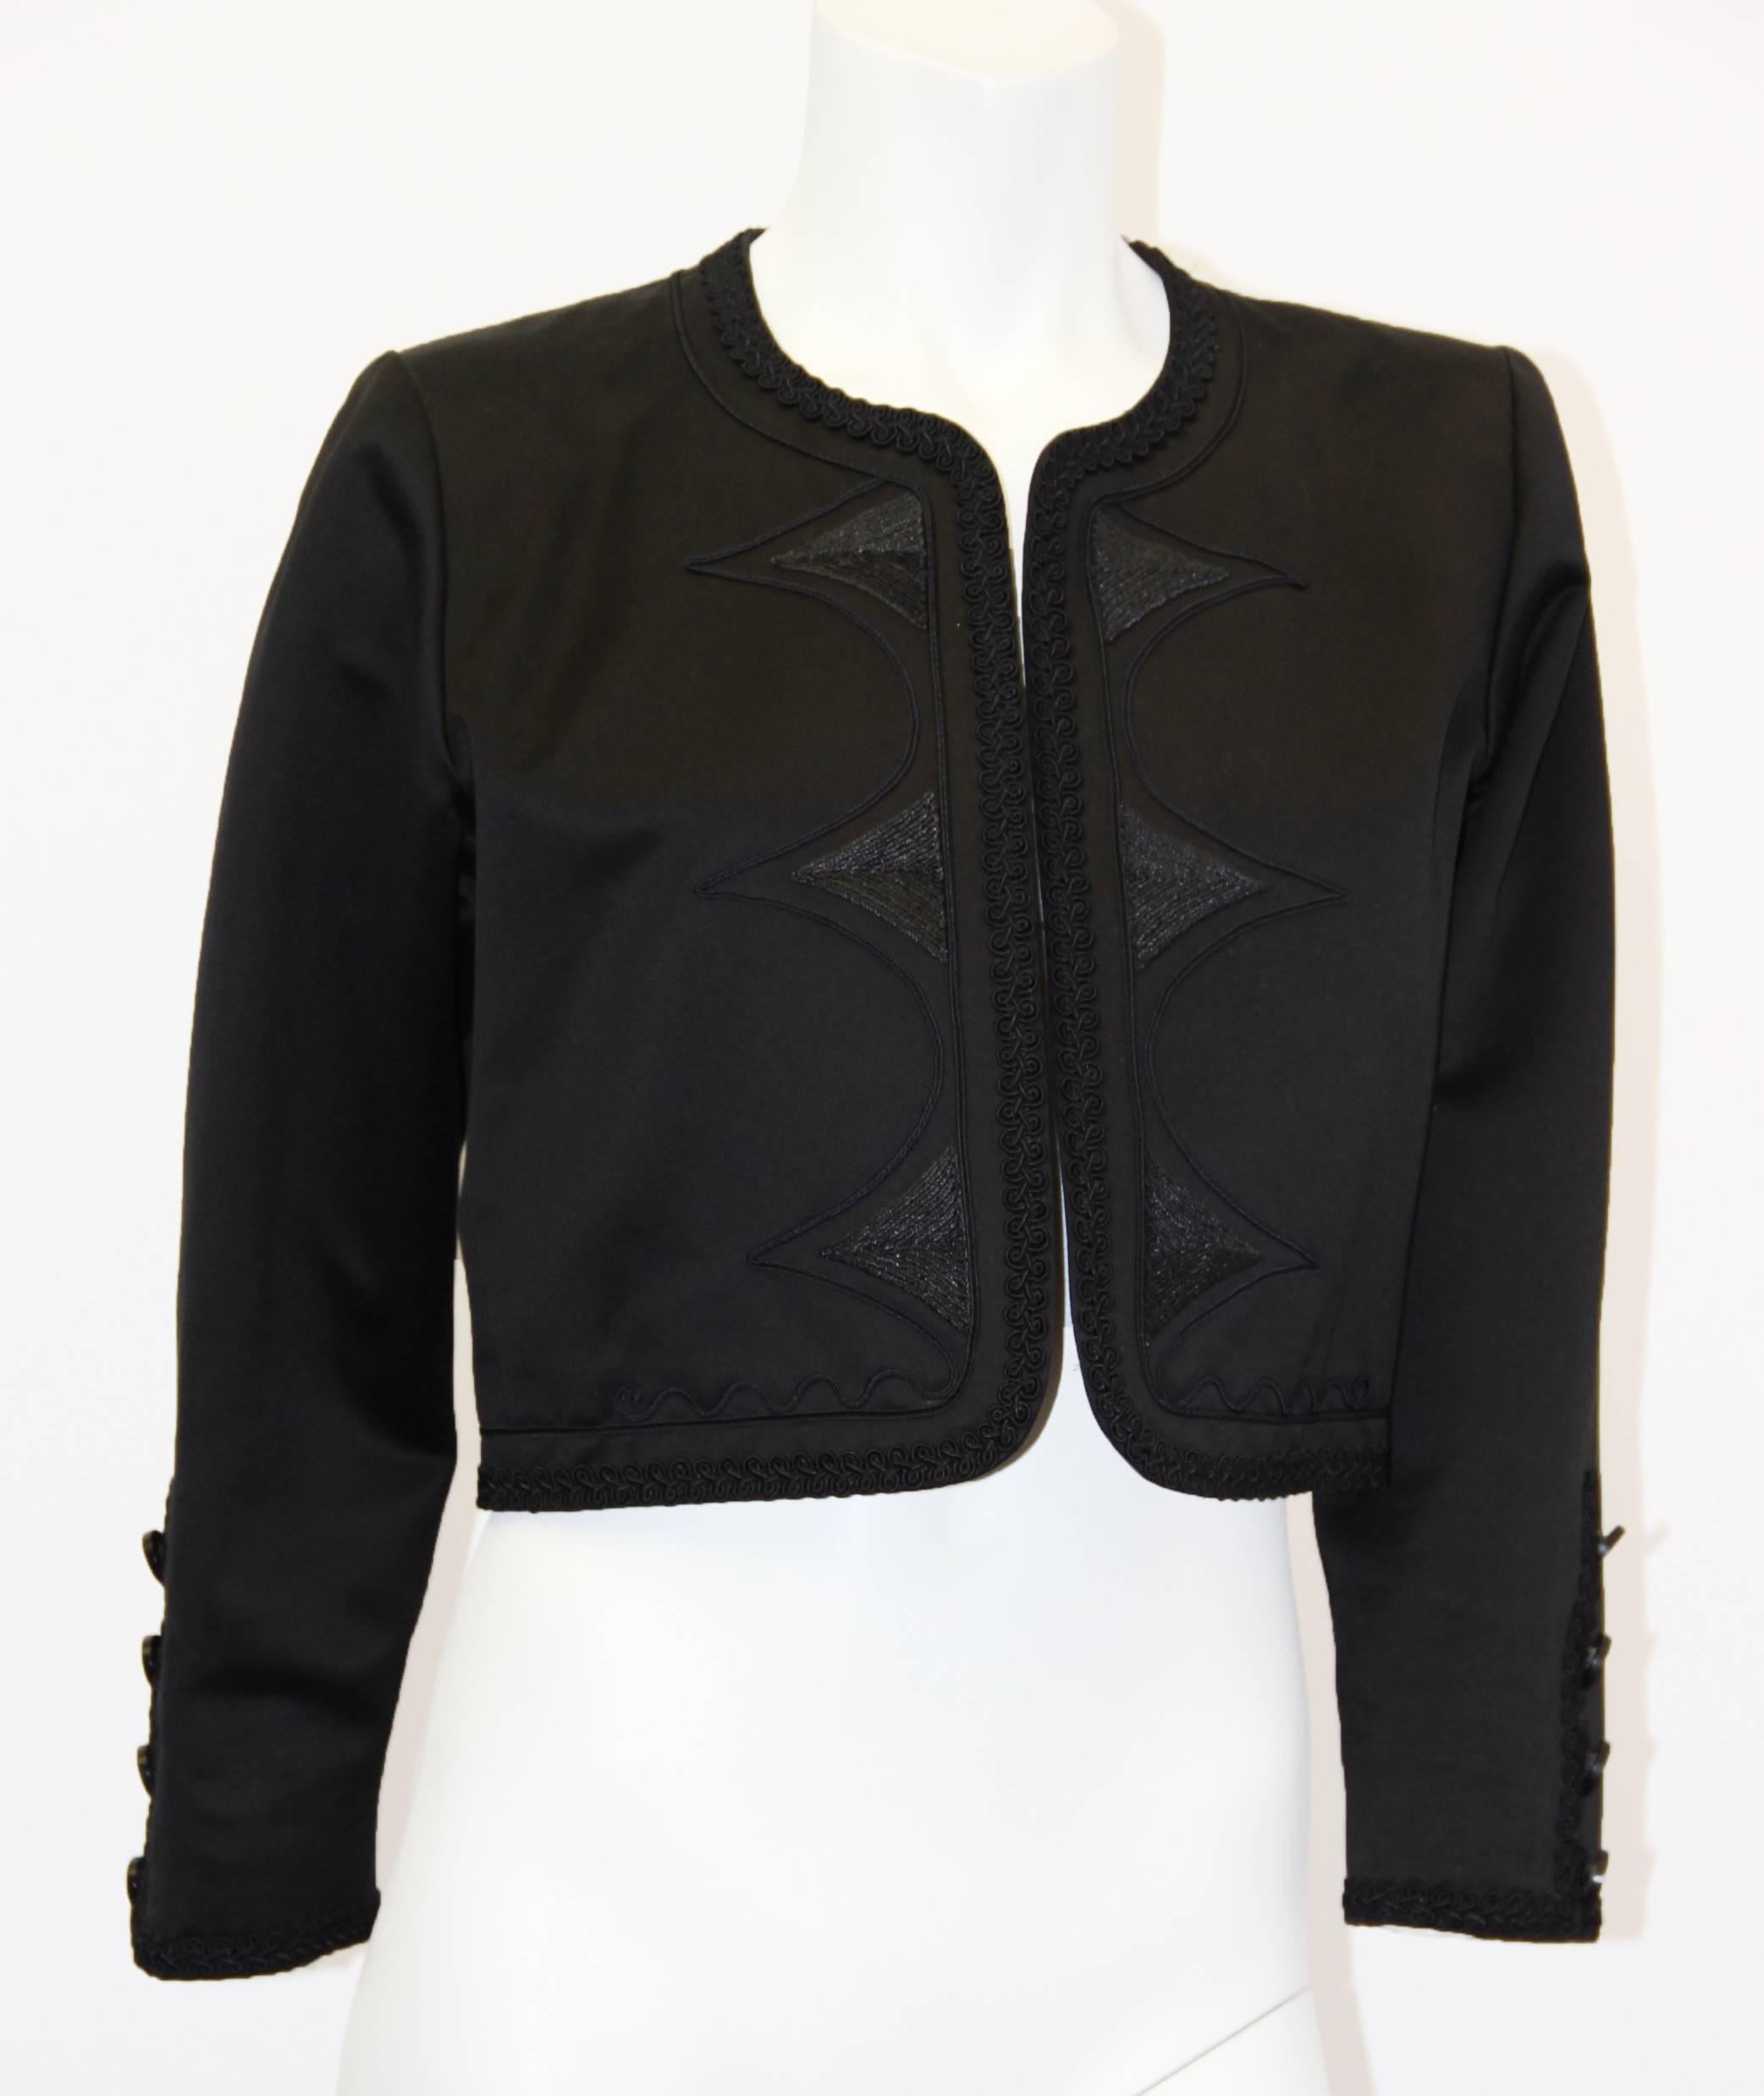 90s Yves Saint Laurent bolero. Raffia embroidery, scalloped trim along edges throughout.  Four, 8 pointed star stamped buttons on cuffs.  (sleeve length is 21 inches, shoulder seam to cuff)